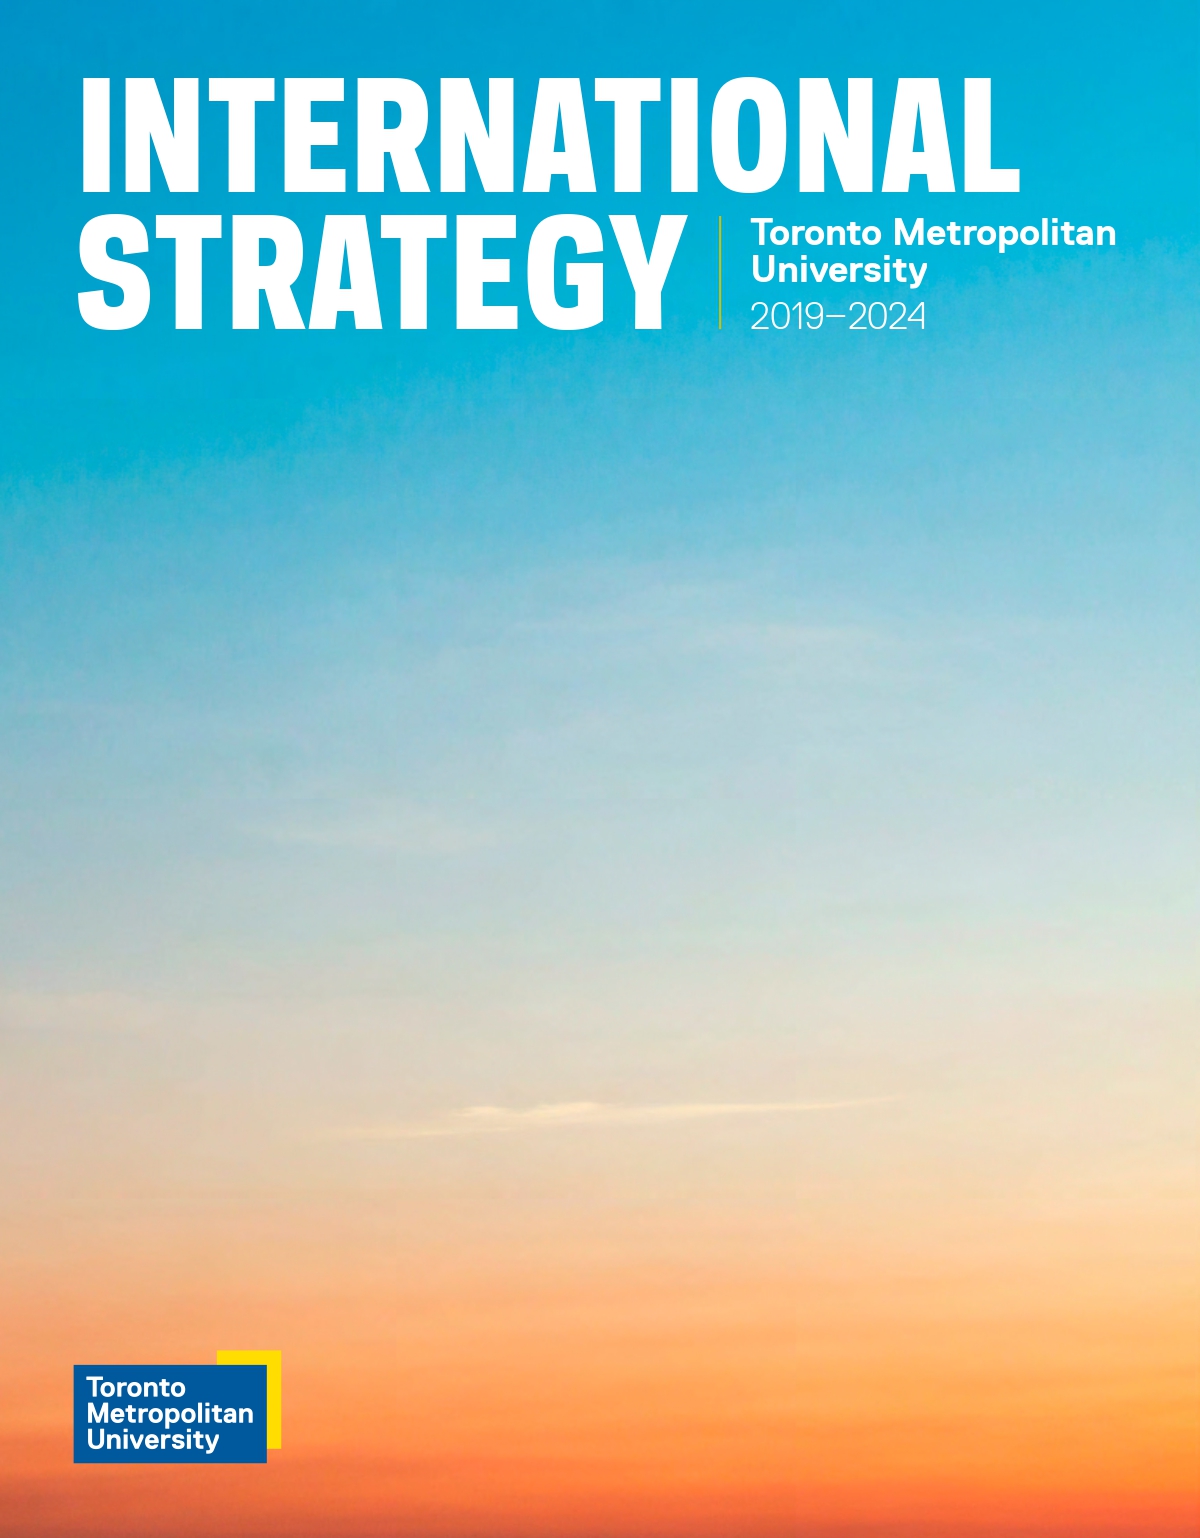 Cover of International Strategy document 2019-2024.